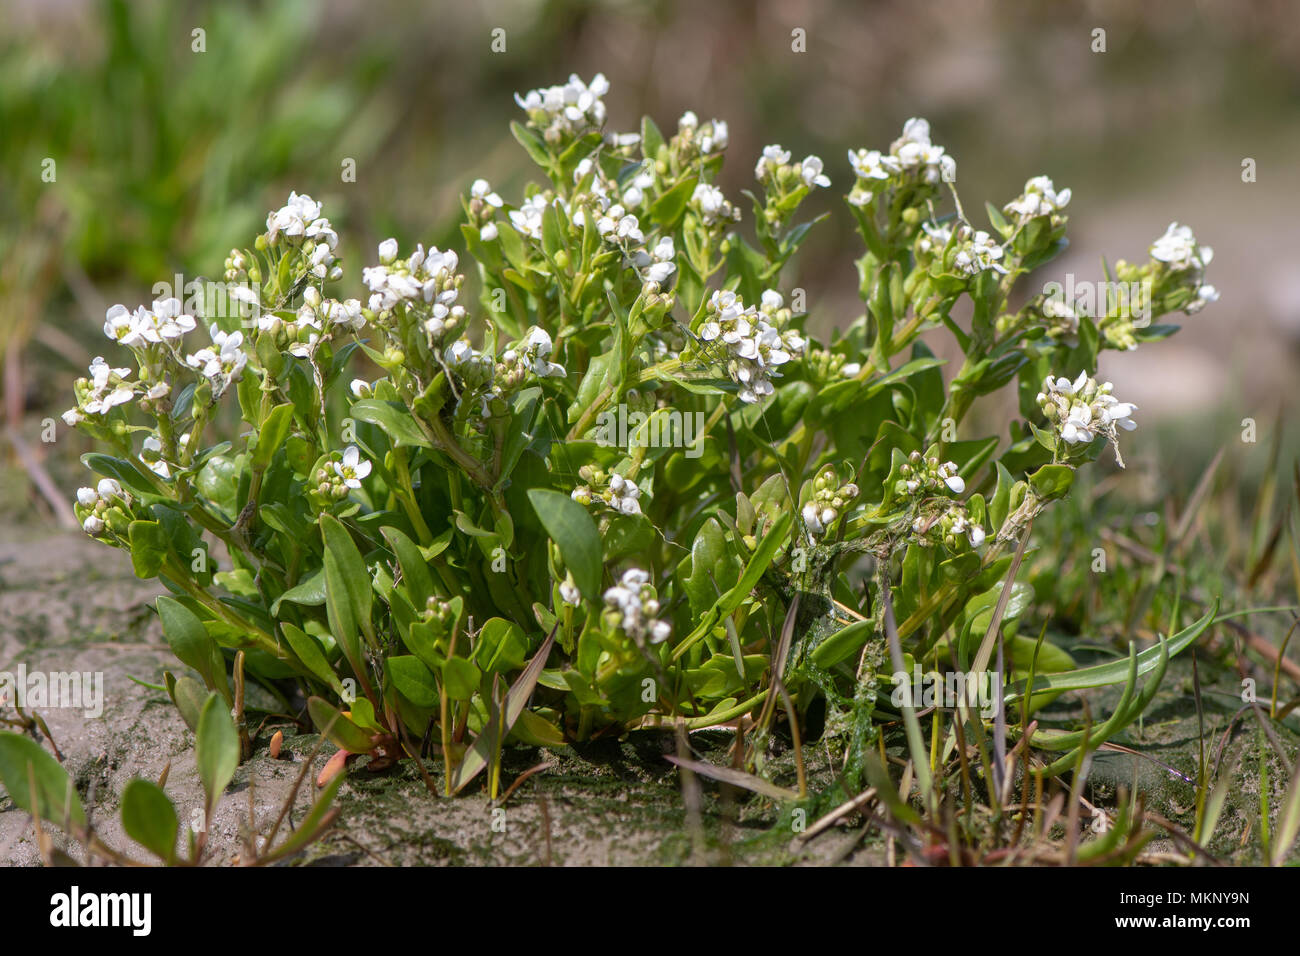 Common scurvygrass (Cochlearia officinalis) plant in flower. Coastal plant in the family Brassicaceae, aka scurvy-grass and spoonwort, flowering Stock Photo